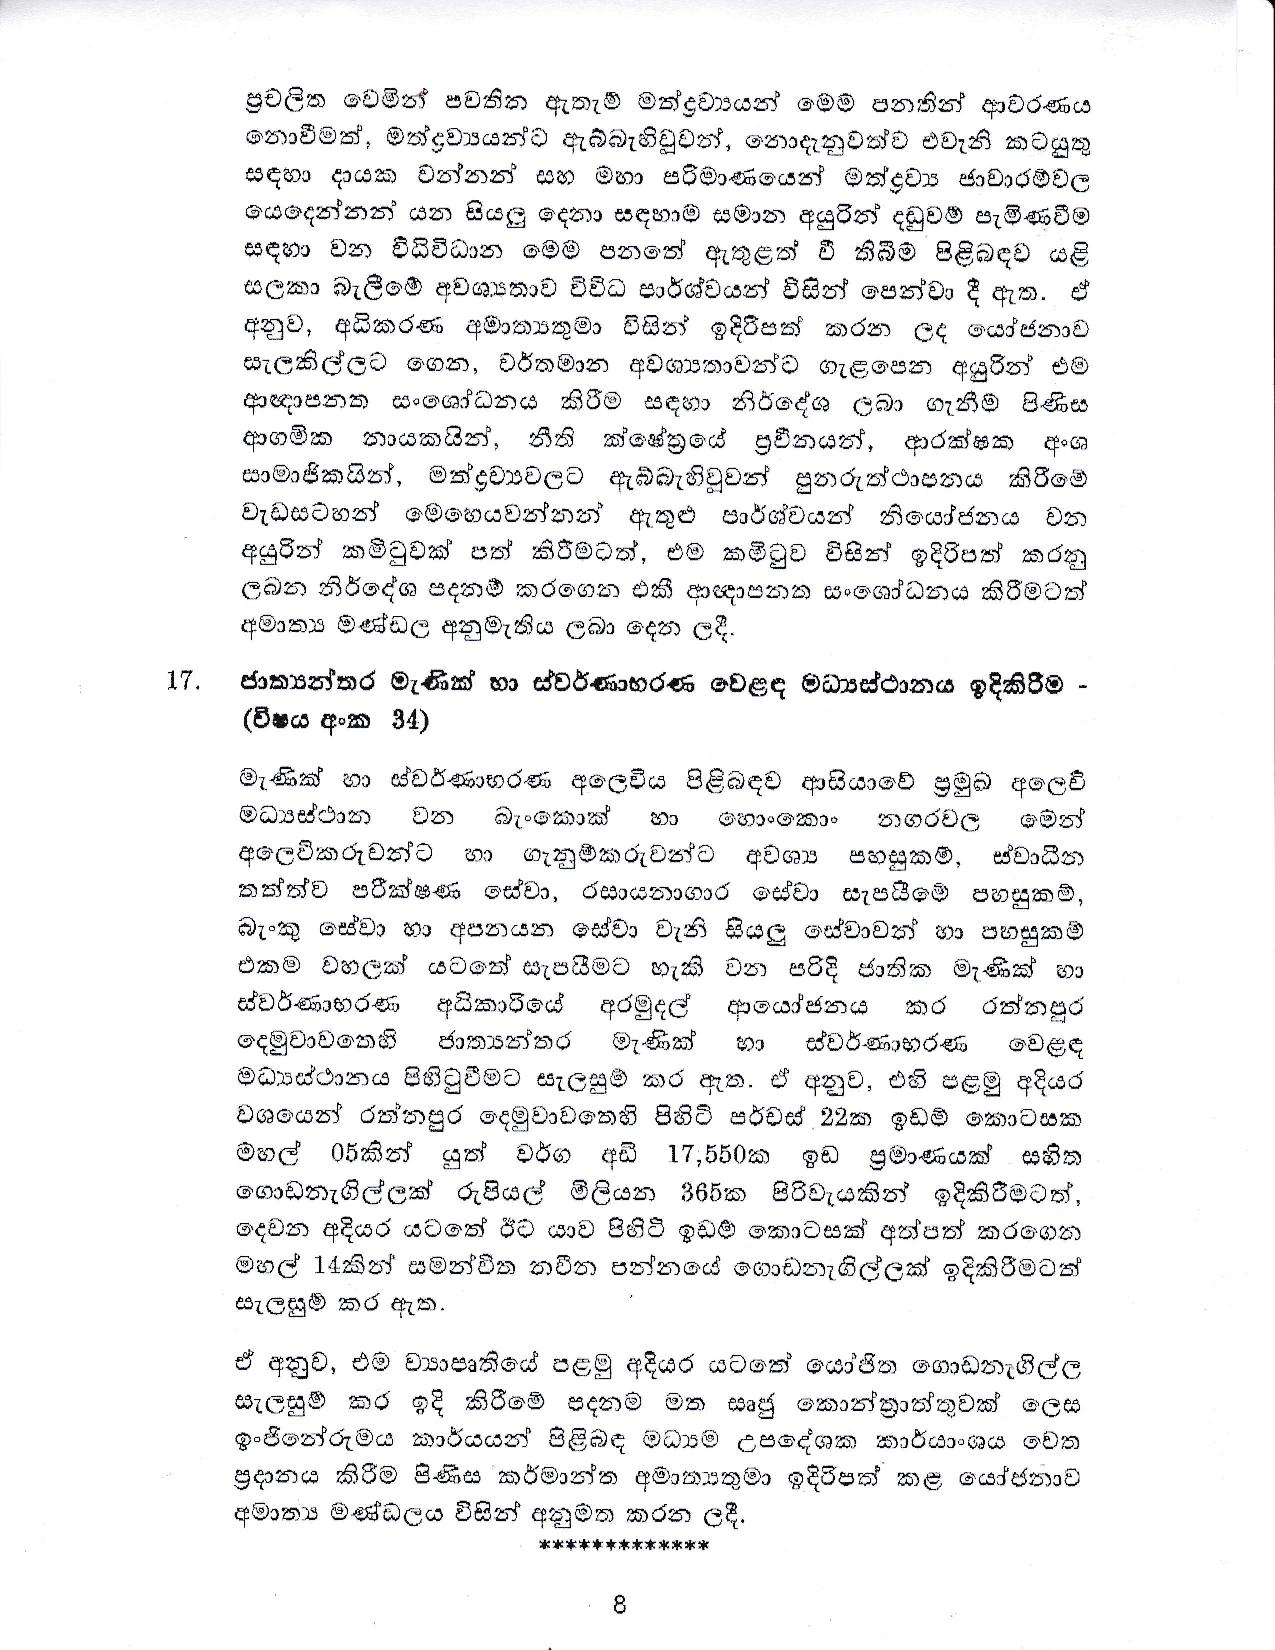 Cabinet Decision on 14.12.2020 page 008